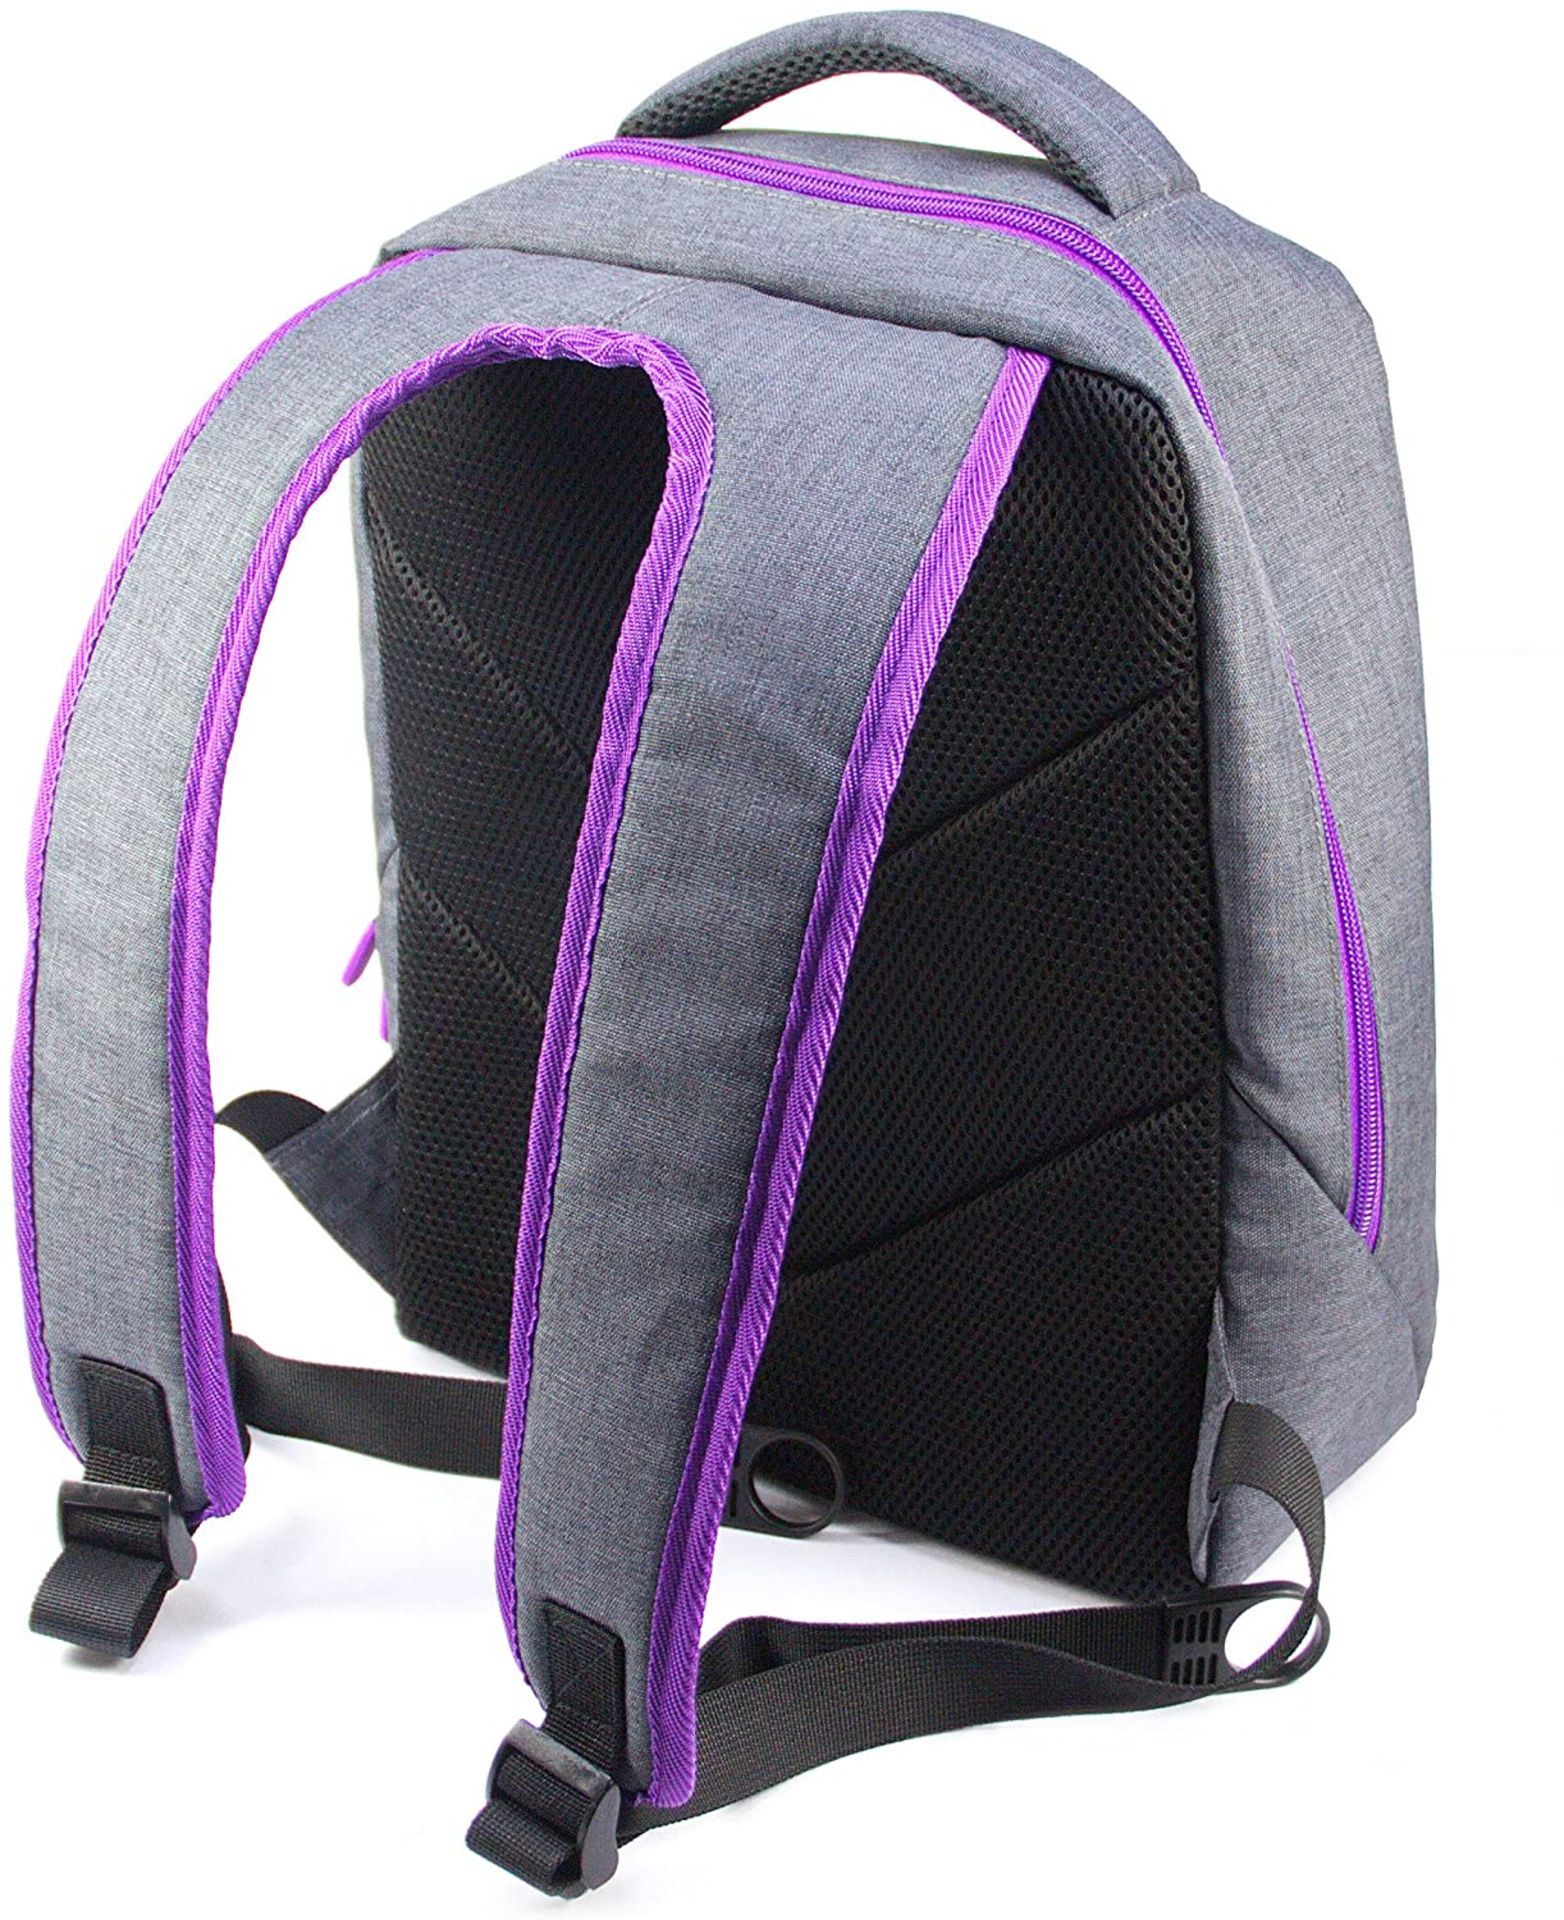 2 X Brand New - BackPack For Computer and Games - Image 3 of 3